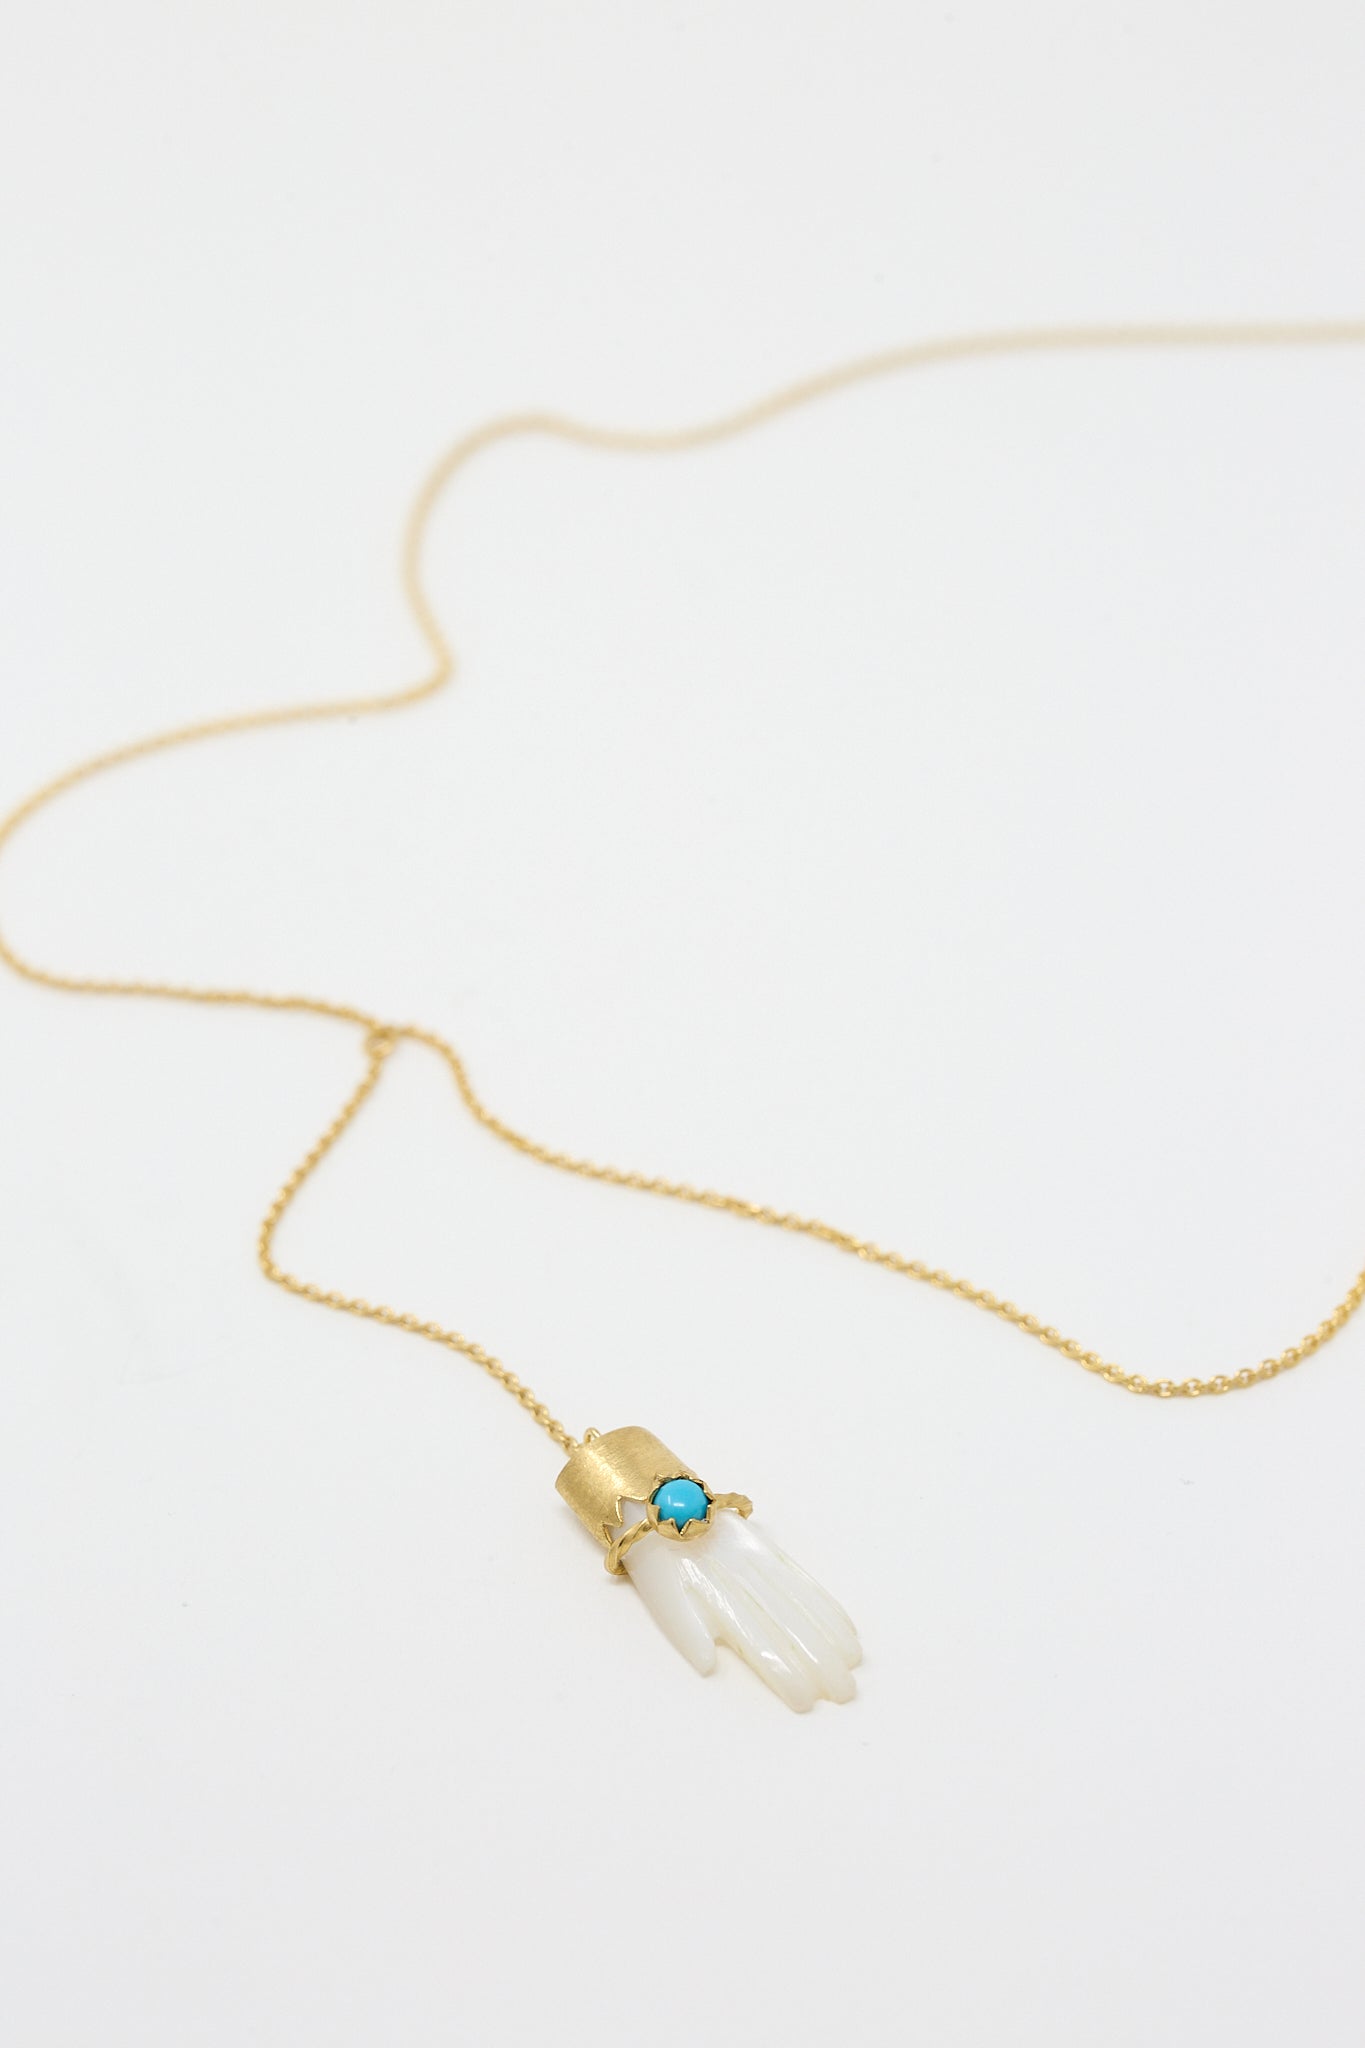 A Grainne Morton Hand Lariat with Bracelet Necklace with a Mother of Pearl stone on it.